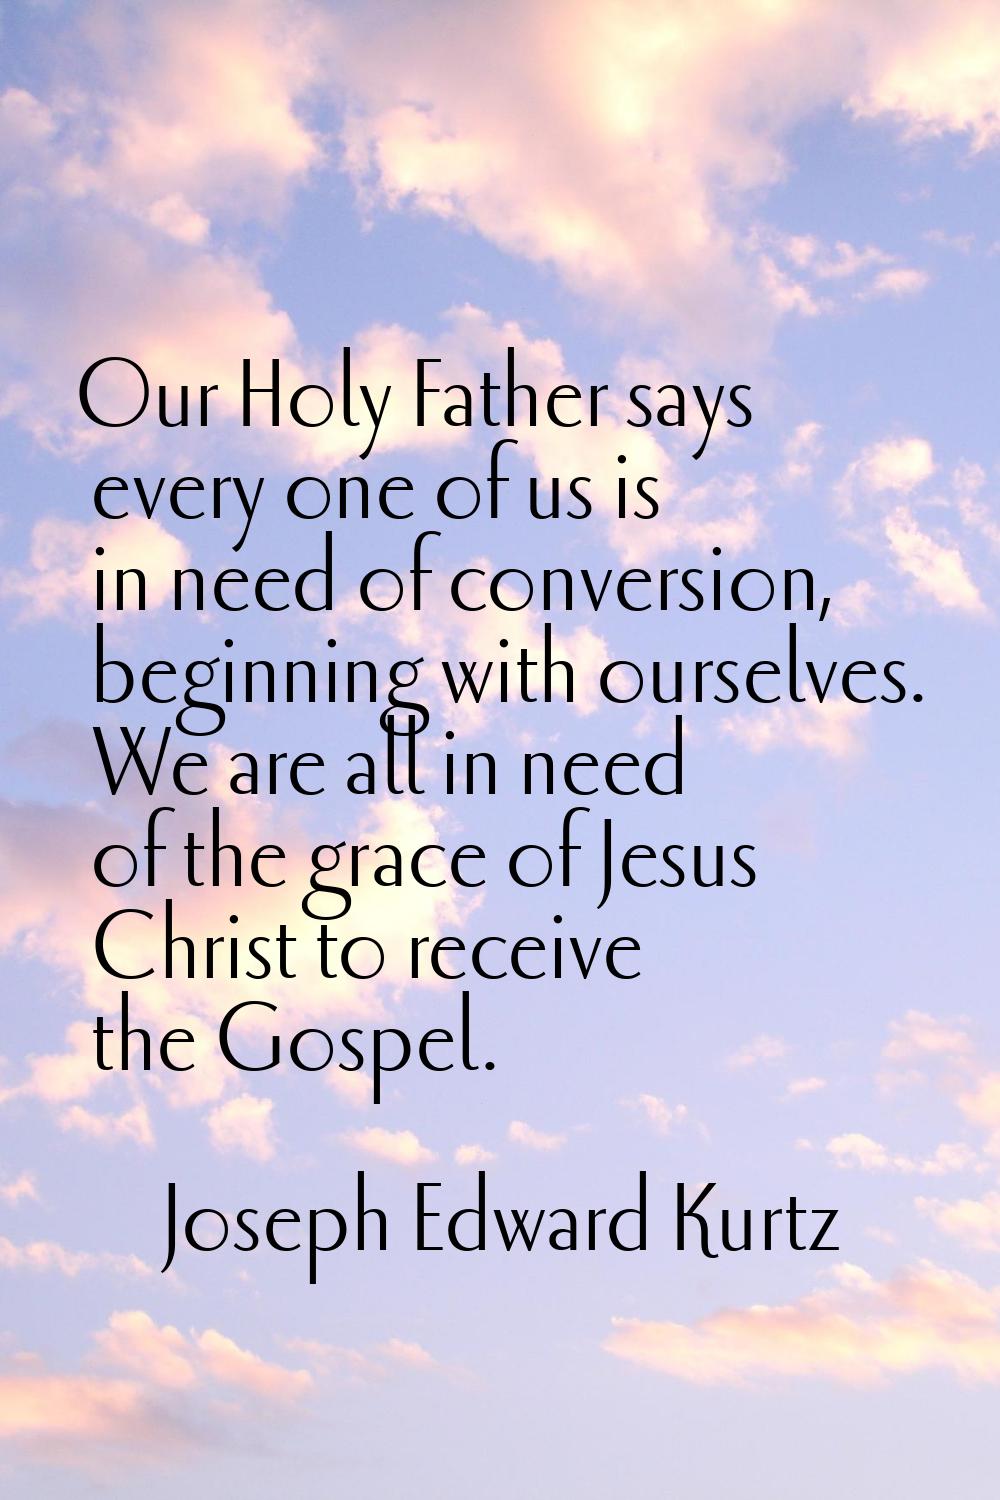 Our Holy Father says every one of us is in need of conversion, beginning with ourselves. We are all